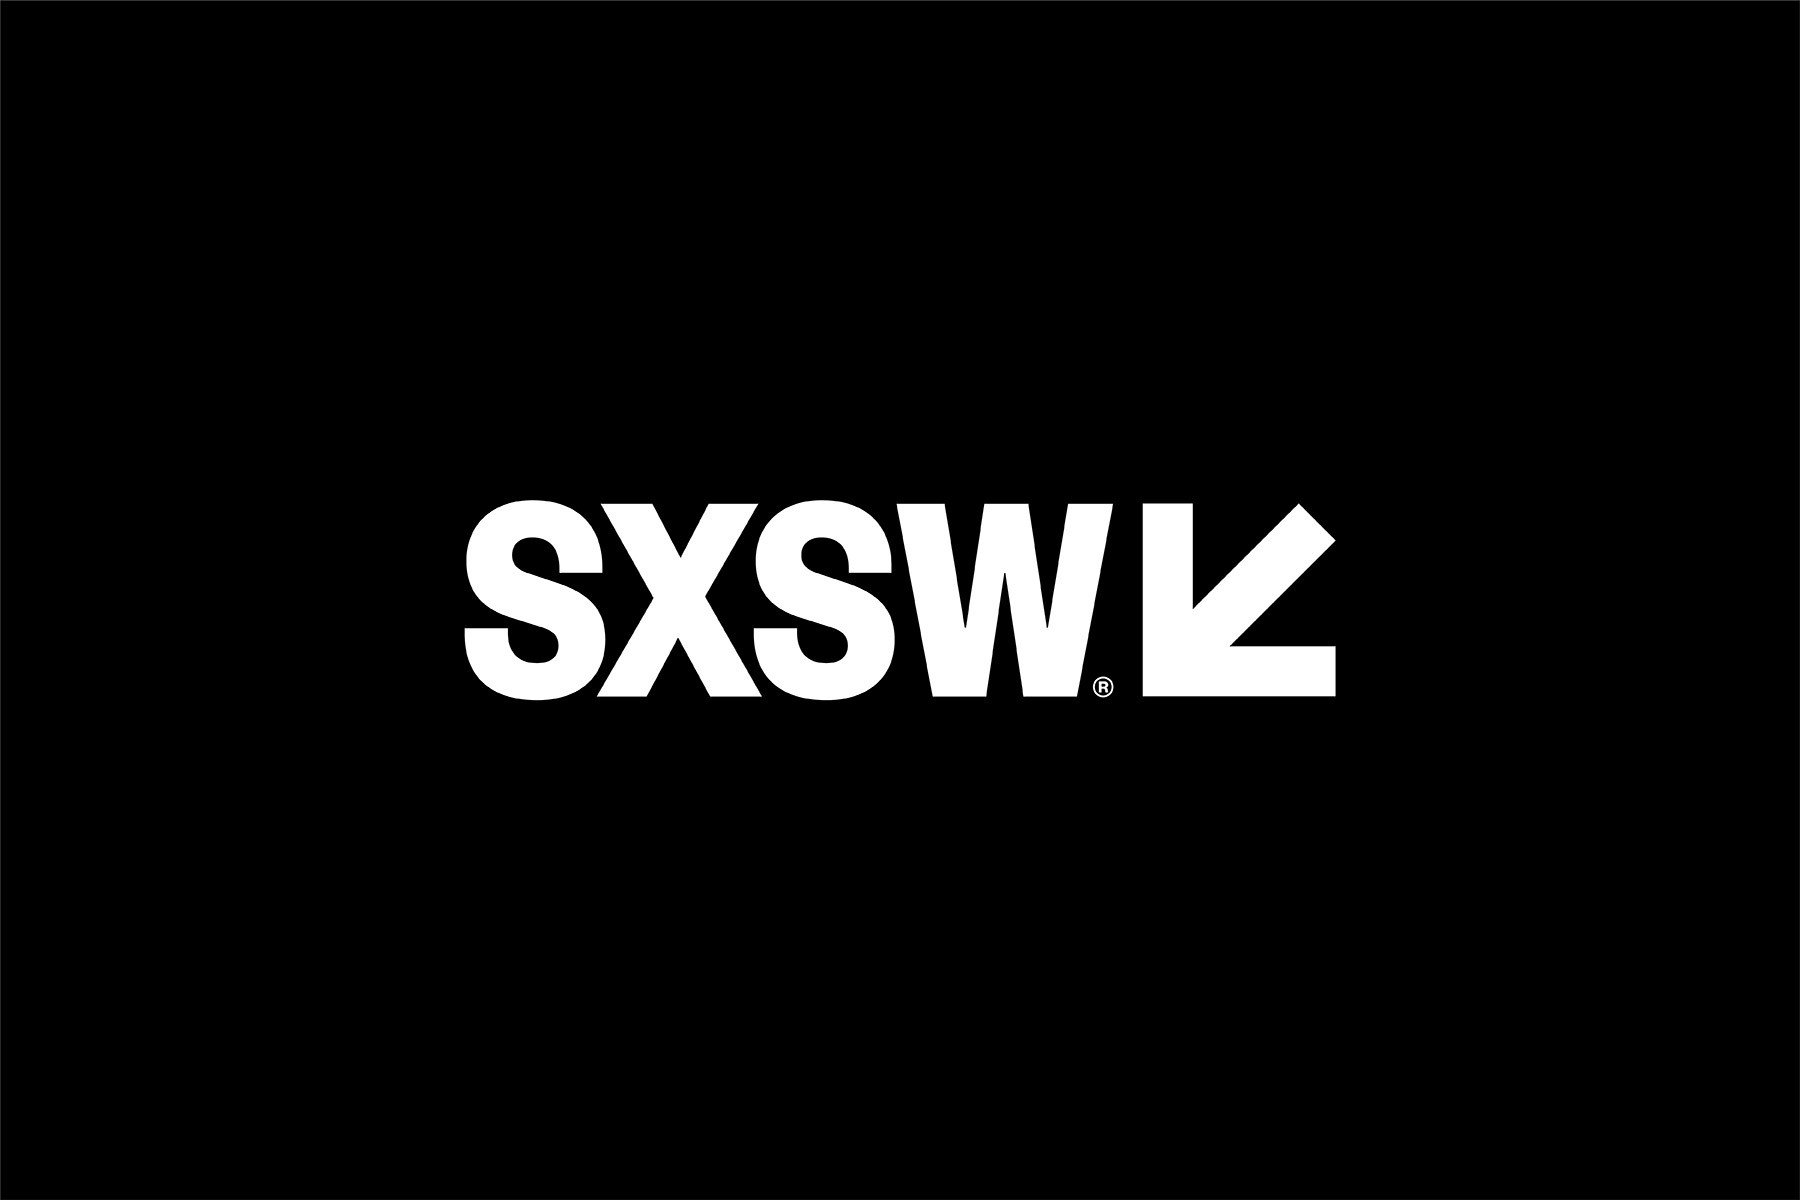 SXSW Responds to Contract Suggesting It May Notify Immigration